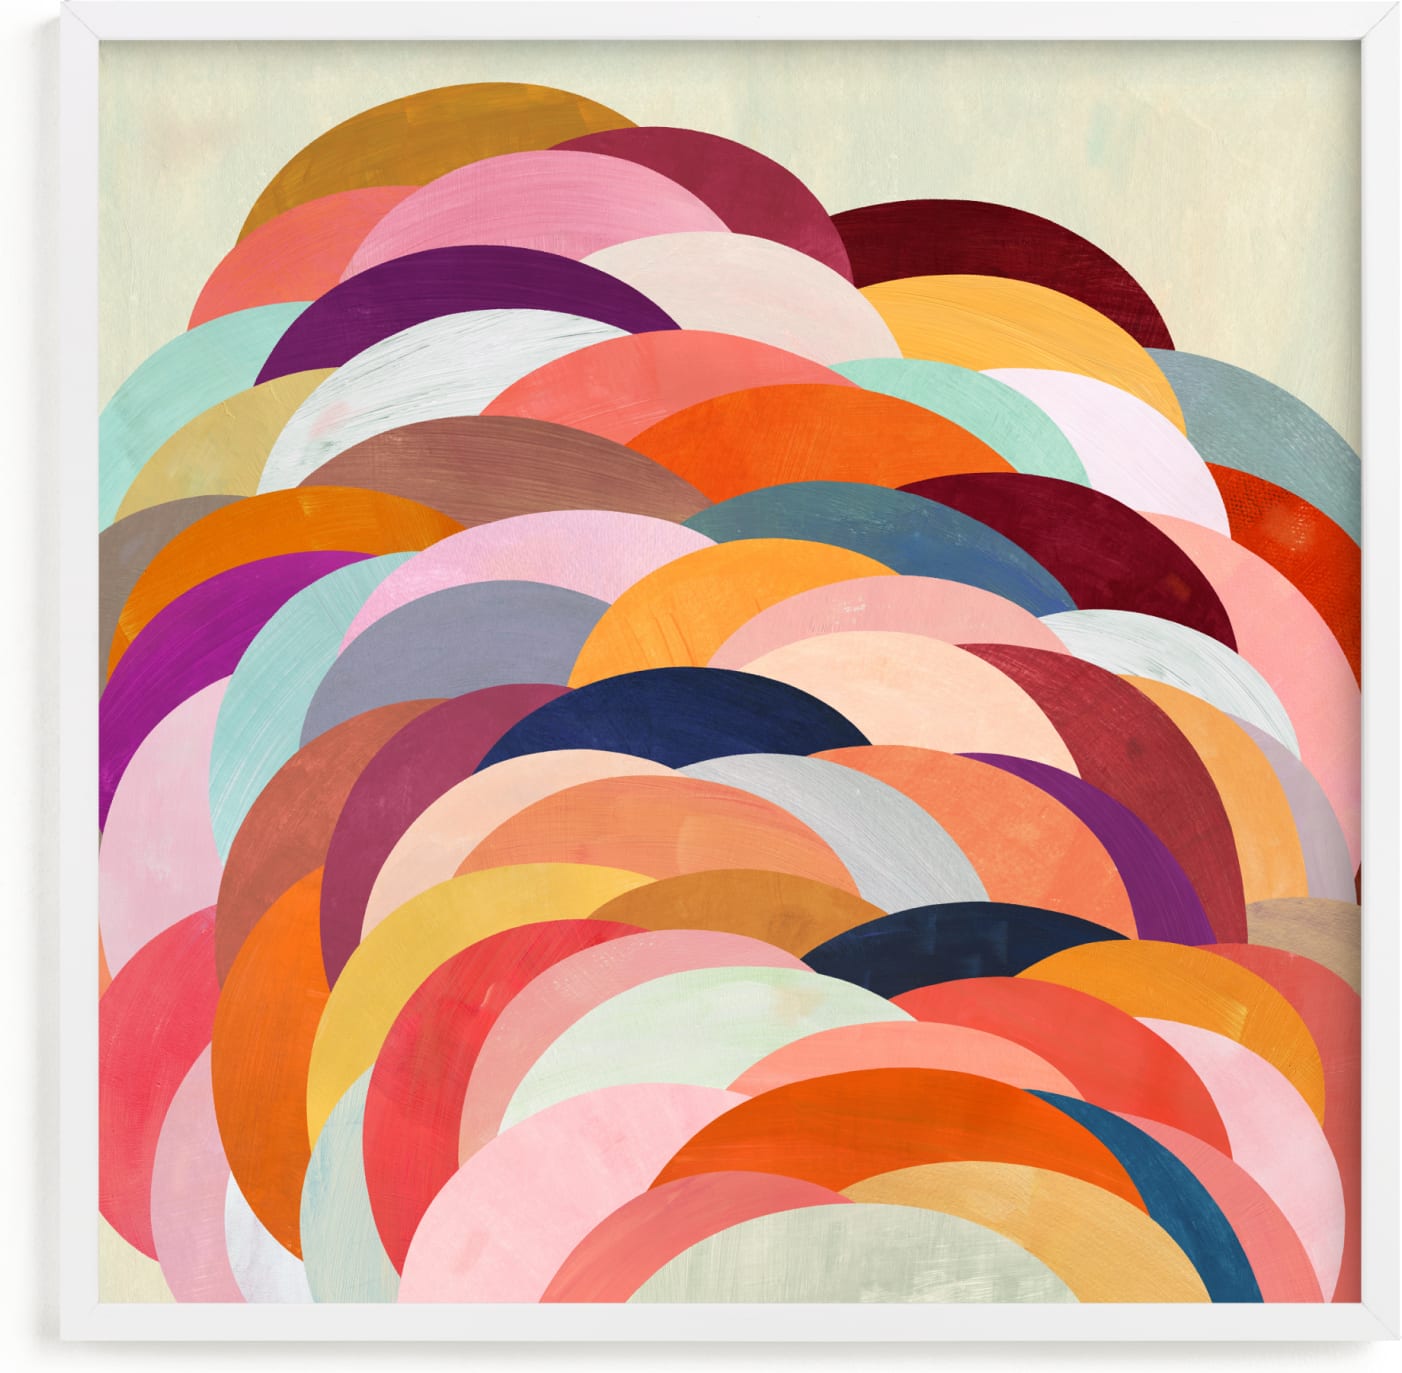 This is a colorful art by melanie mikecz called Discus.